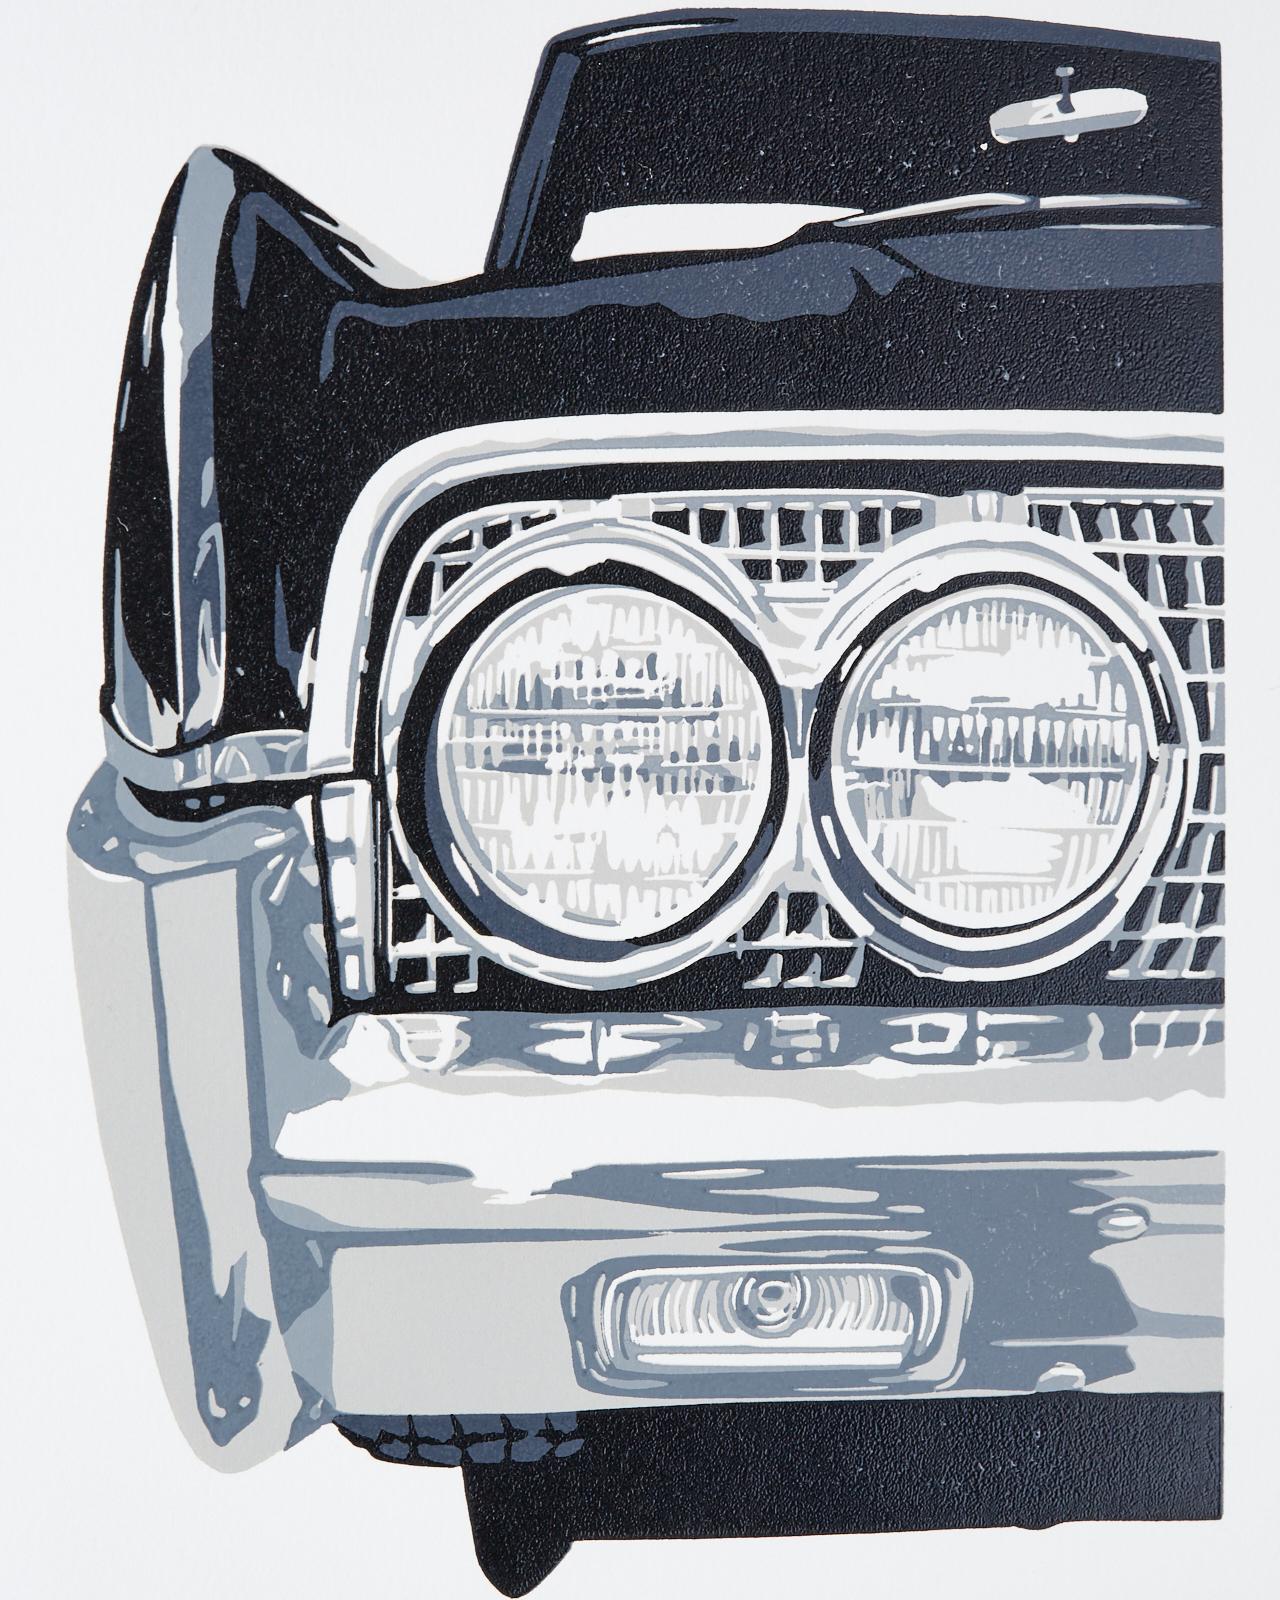 The Black Lincoln Continental  - American Realist Print by Dave Lefner